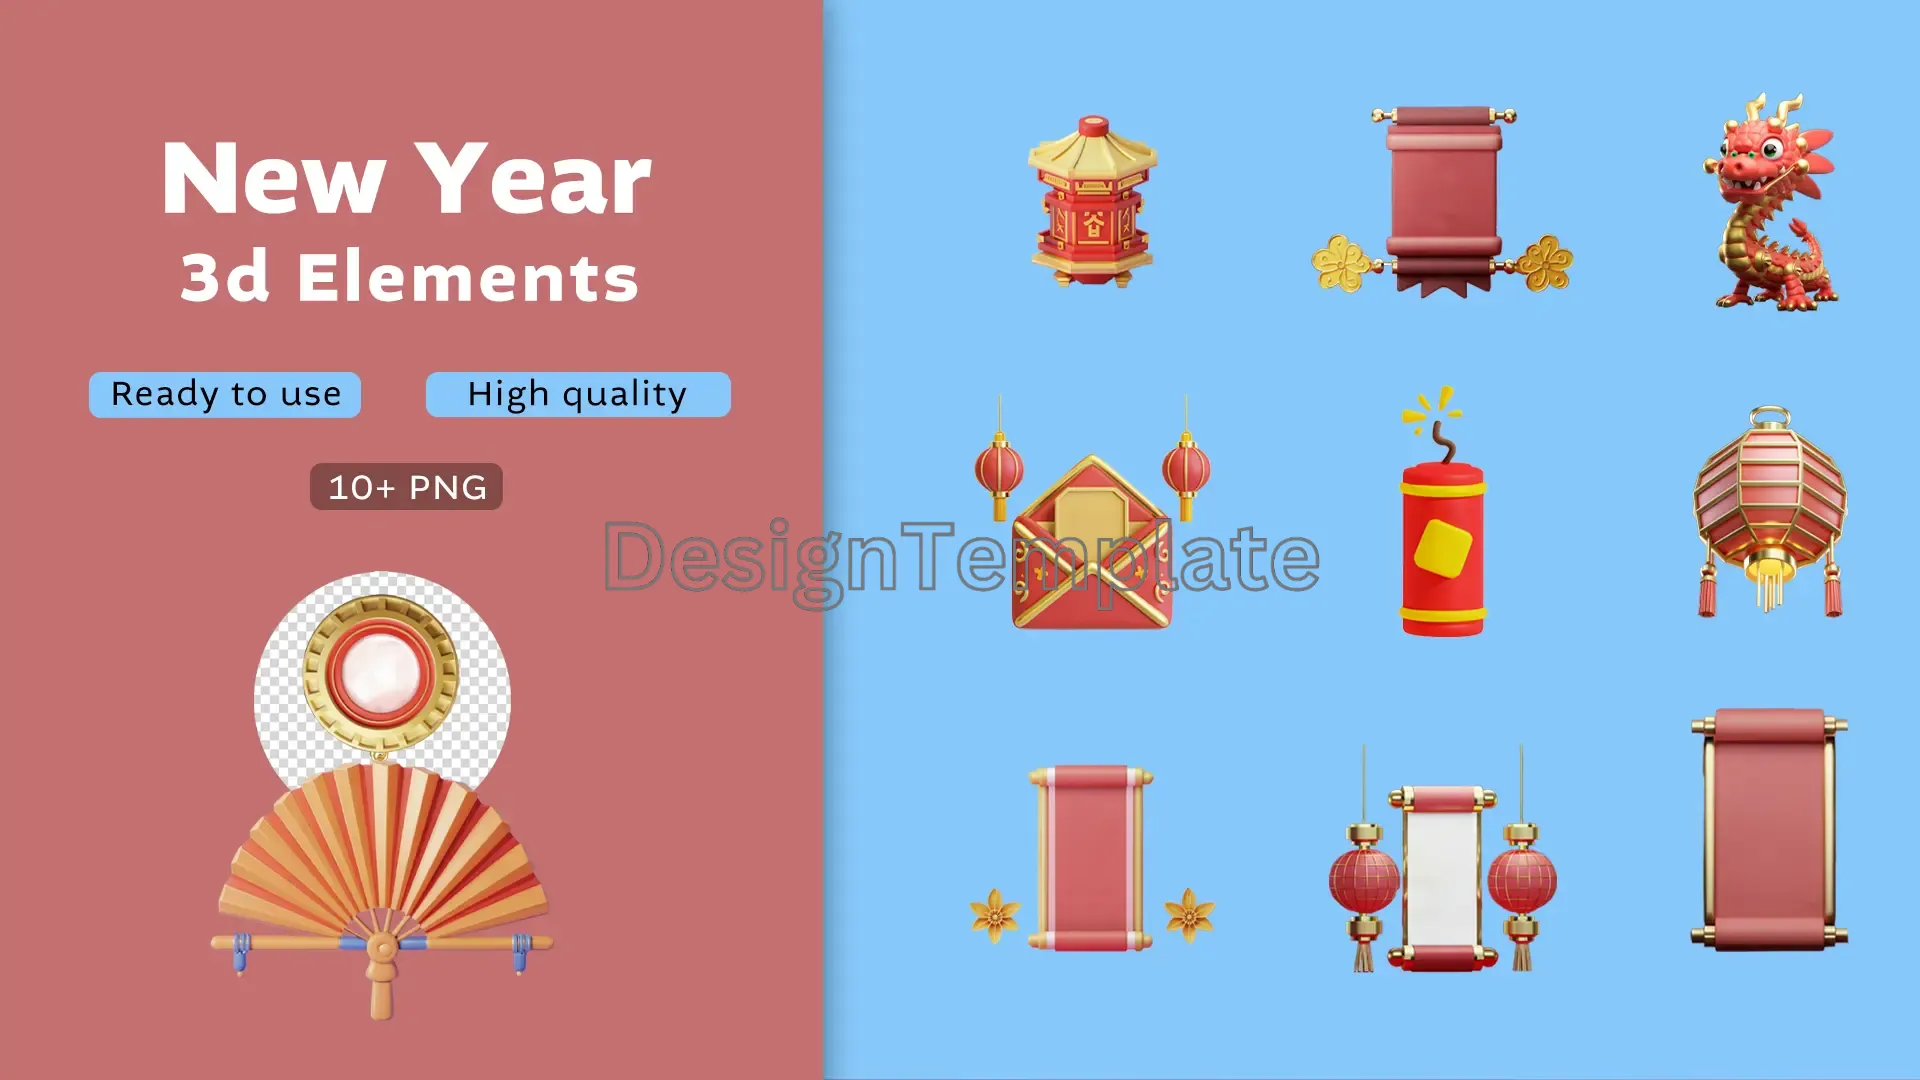 New Beginnings Vibrant 3D New Year Elements Collection